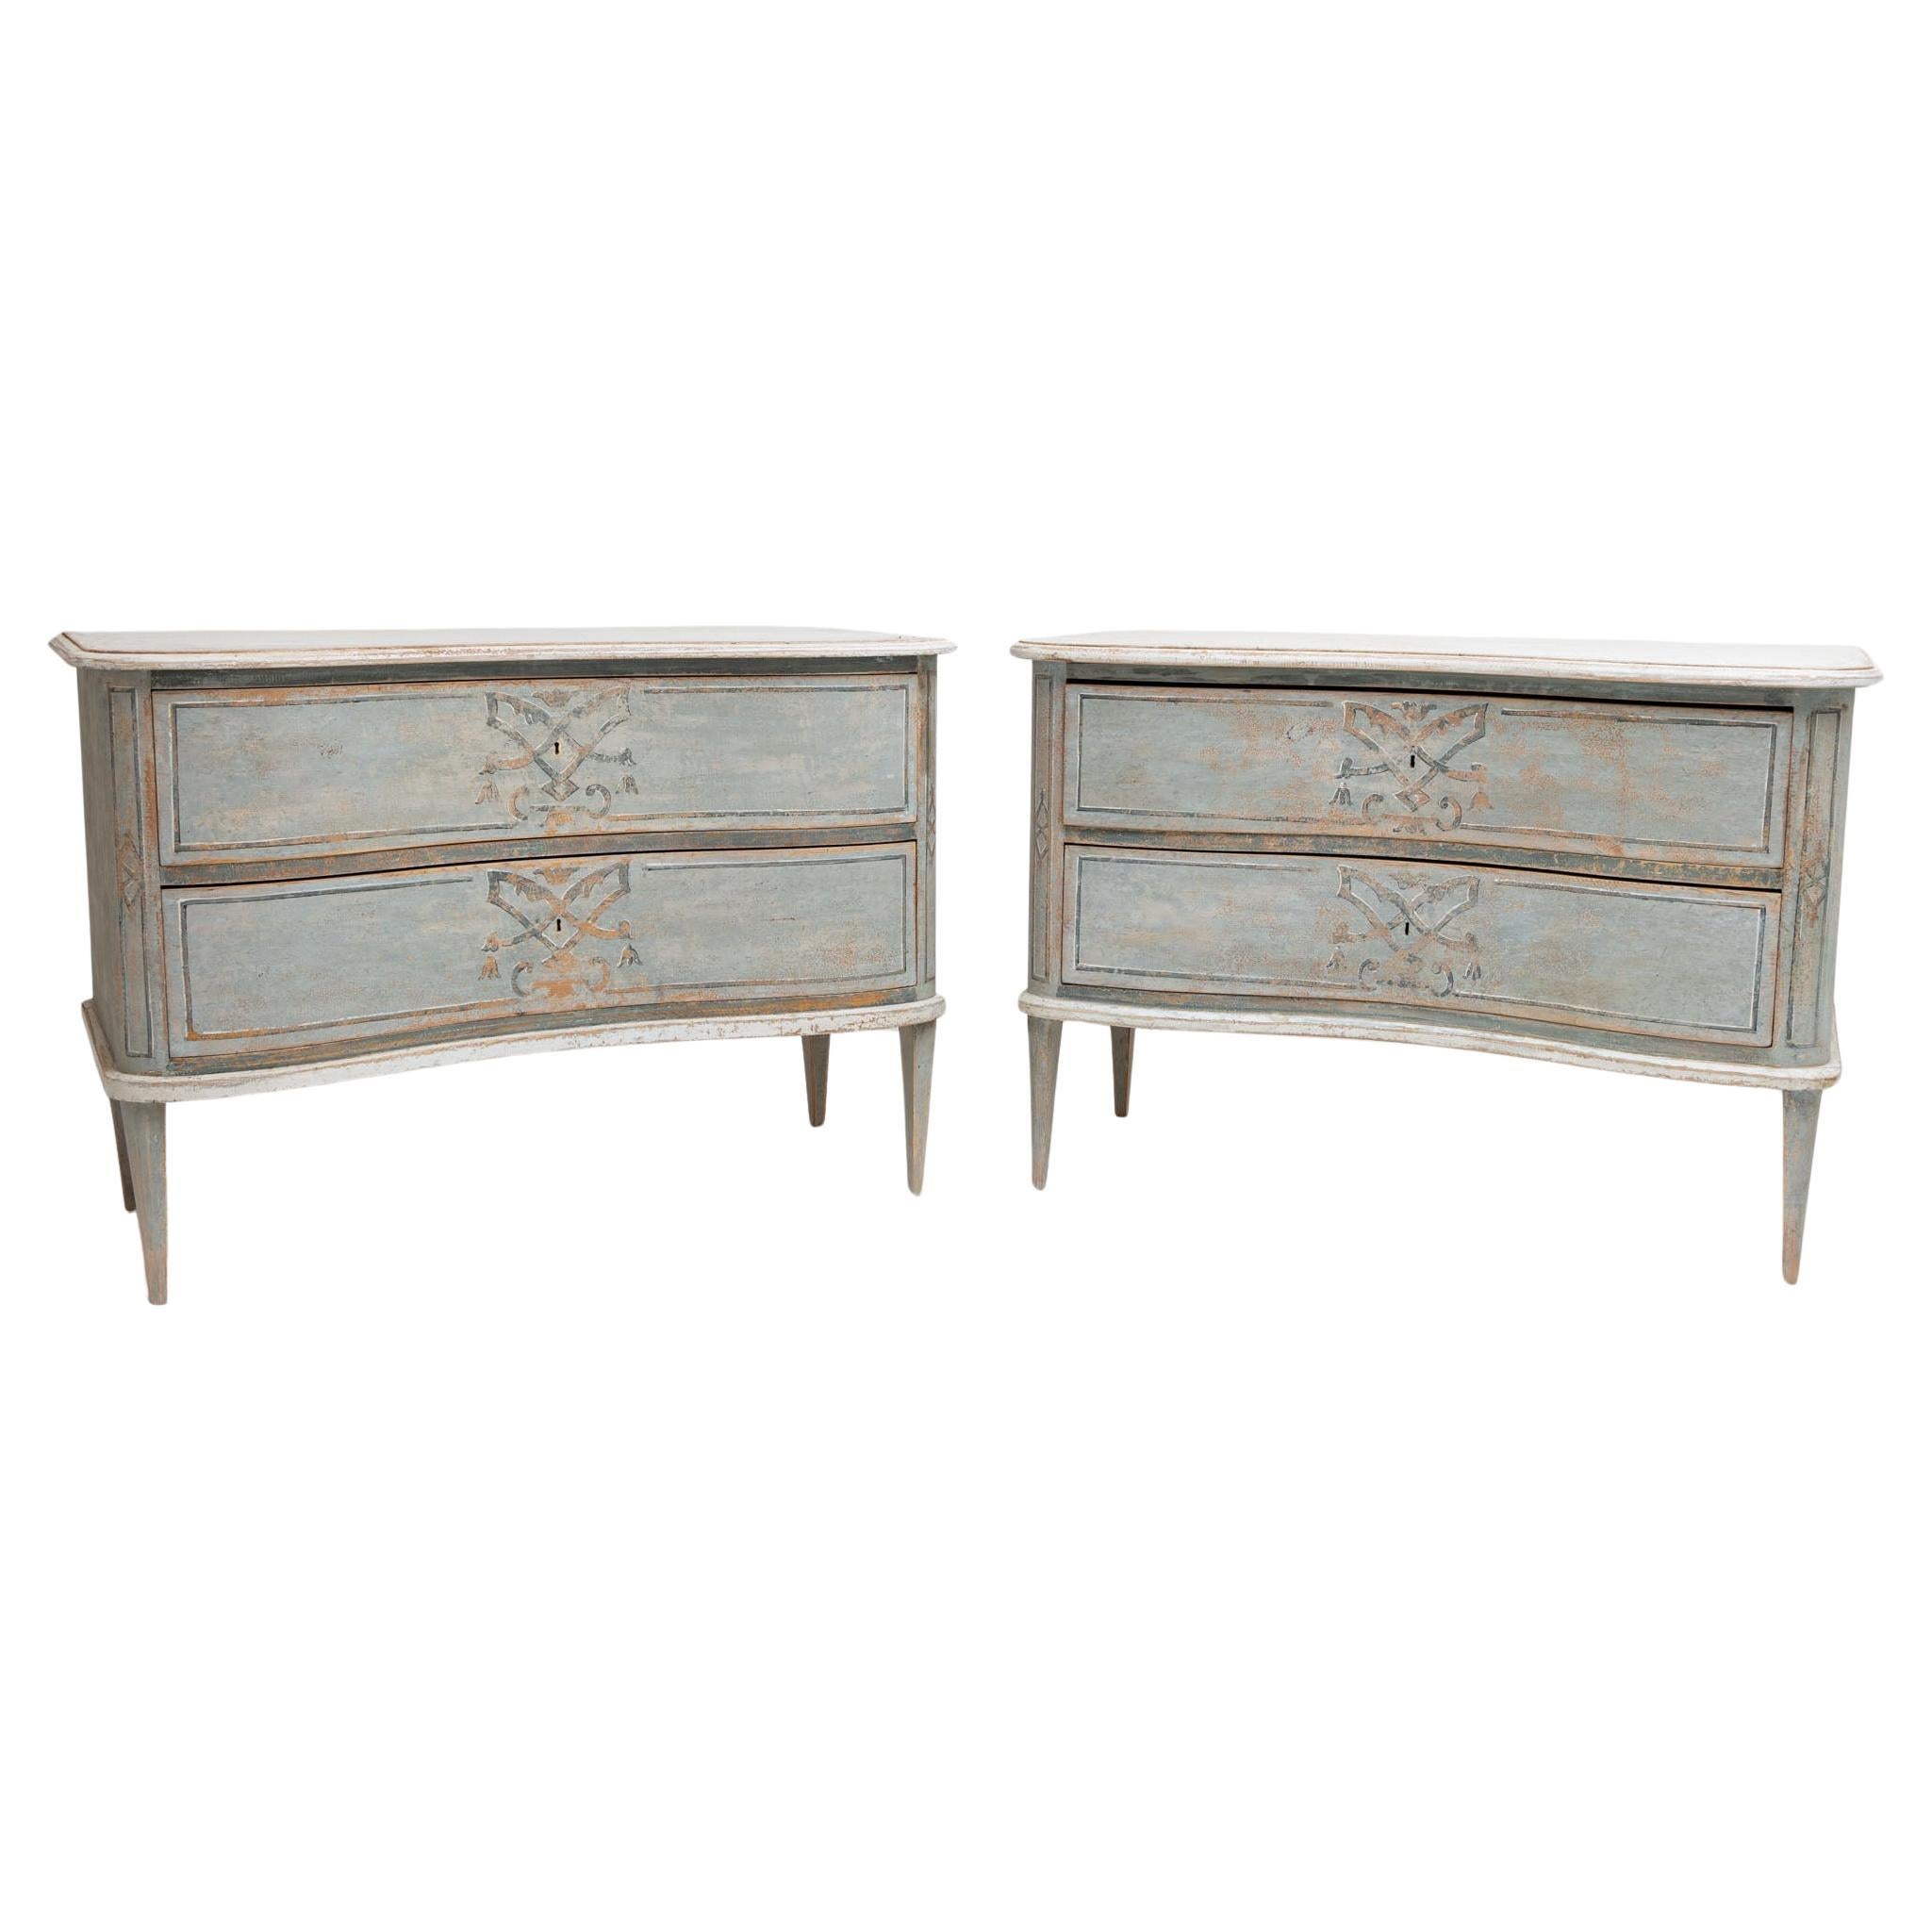 Pair of Painted Chests of Drawers, Denmark, Late 19th Century